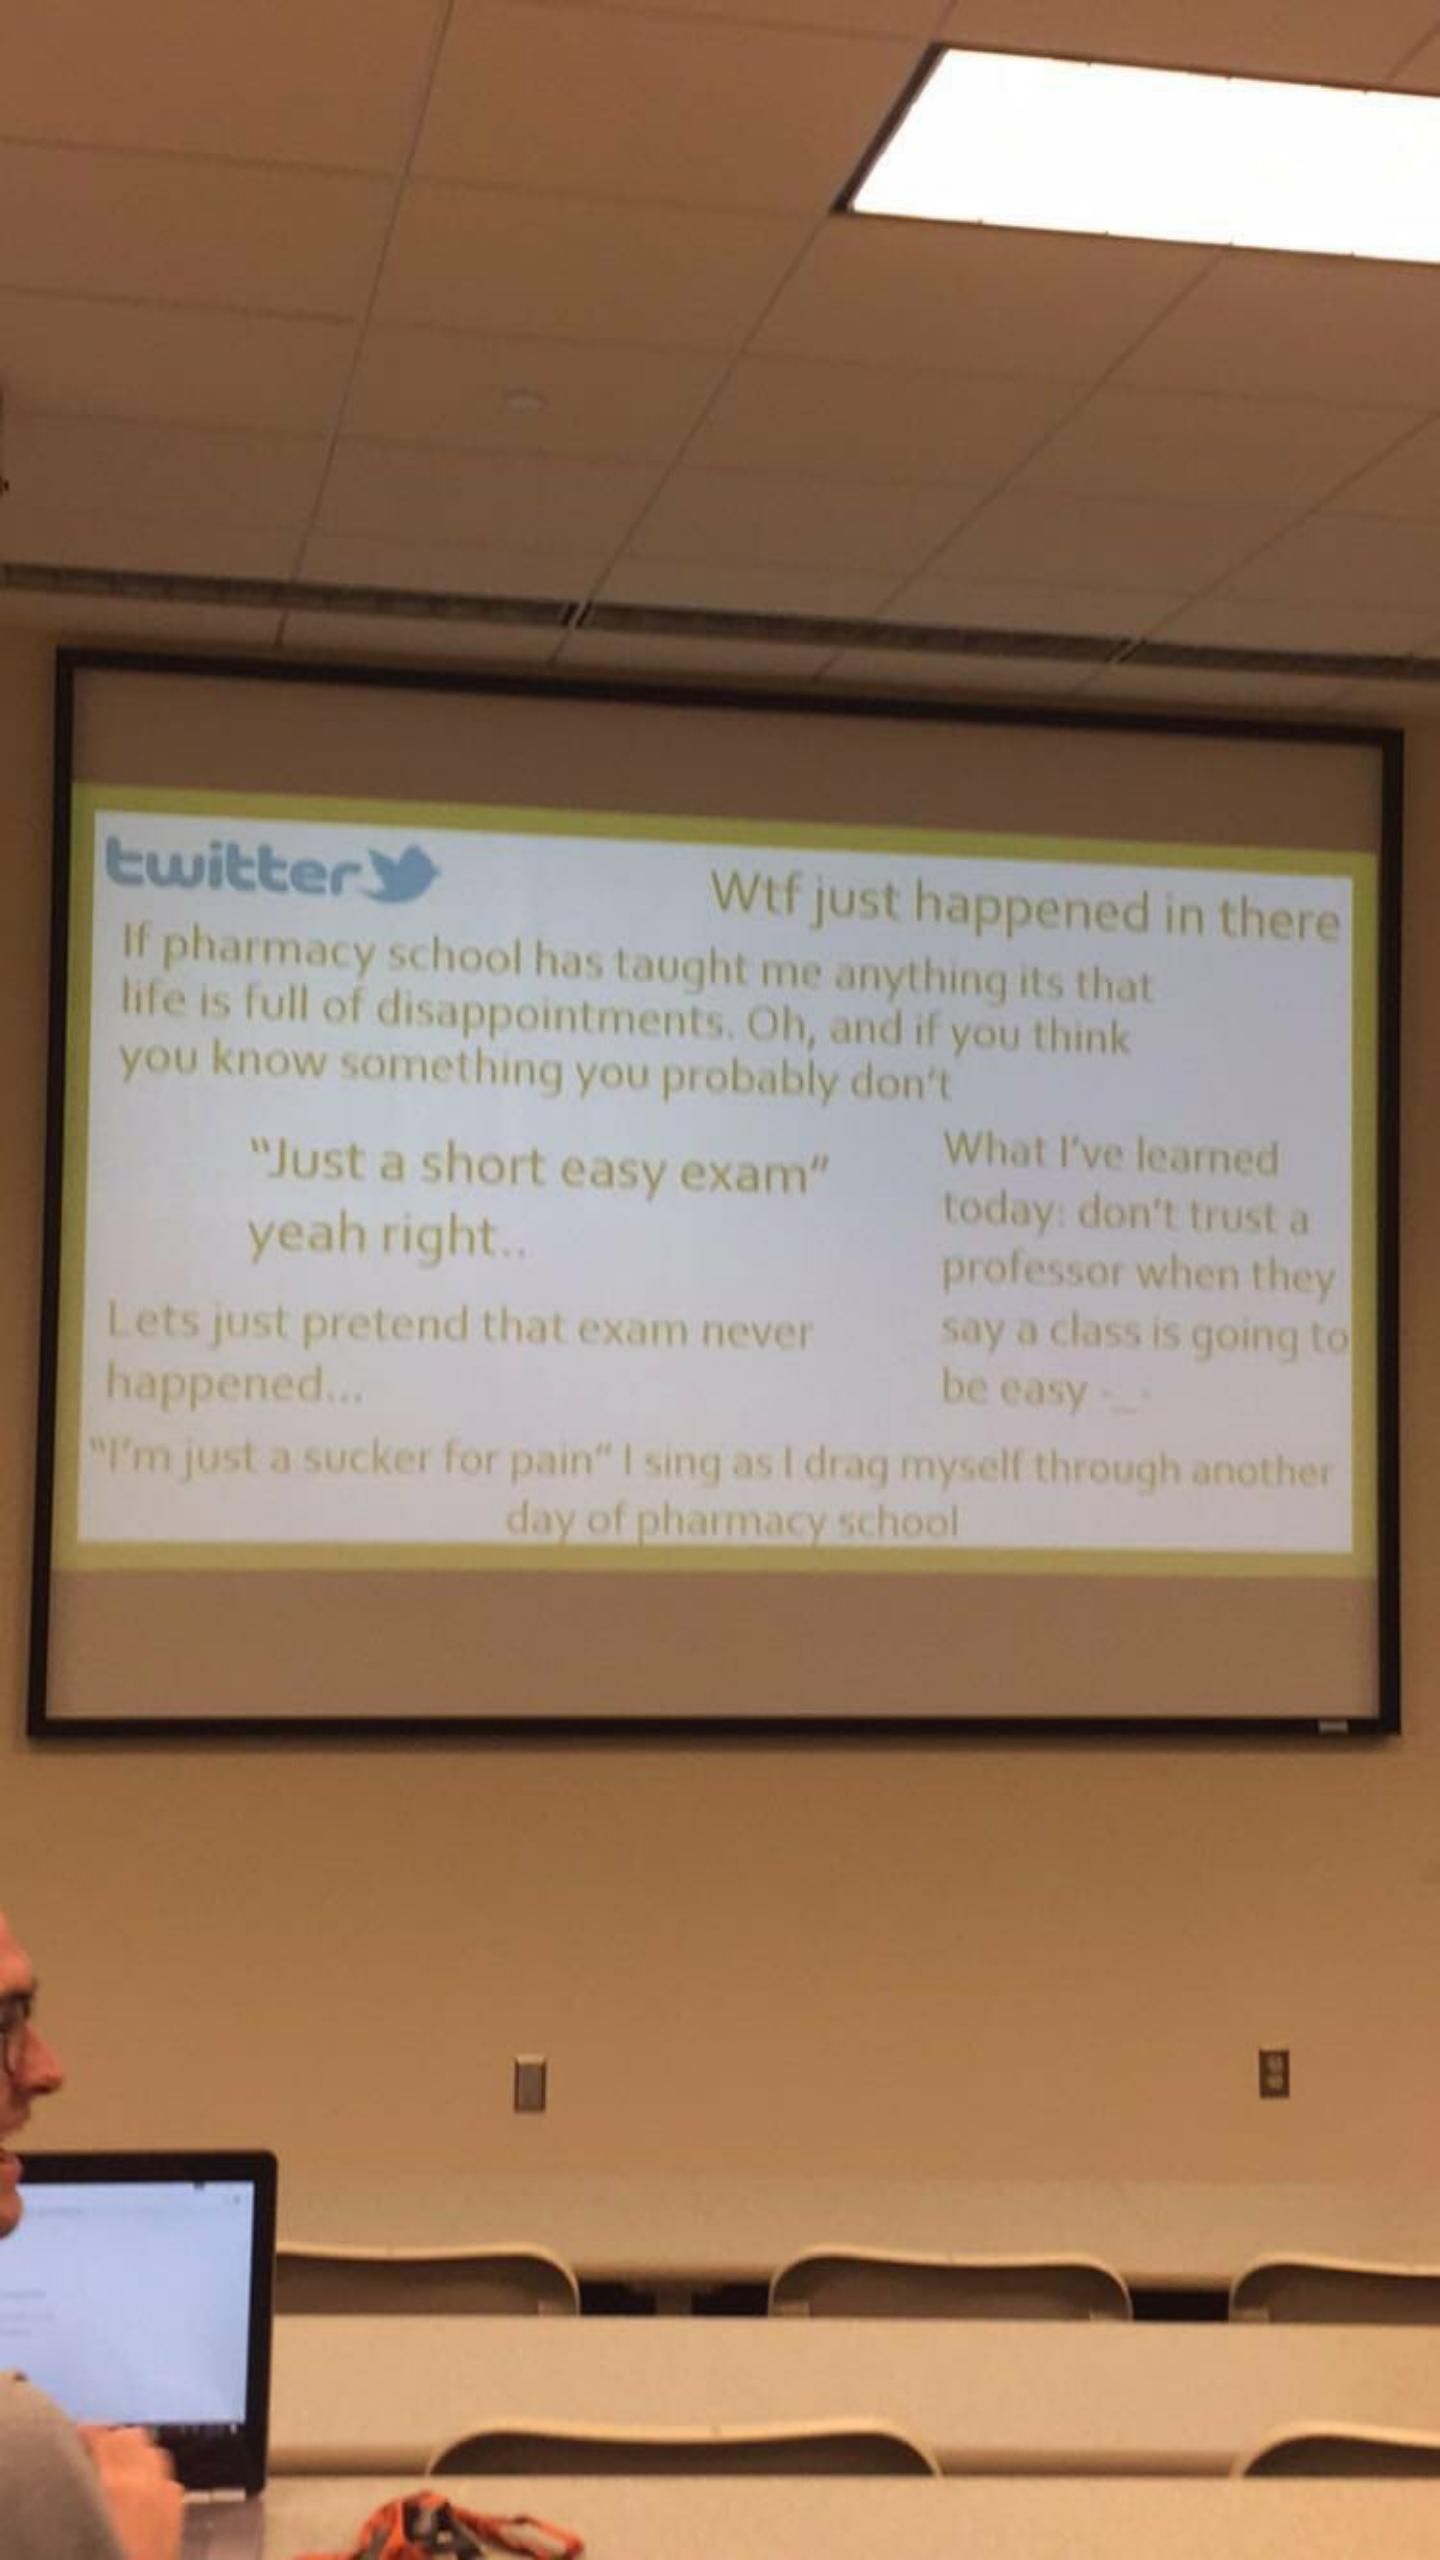 A pharmacy professor looked up students twitter accounts after an exam. The next class day he decided to put them on the screen before lecture. These are some of the results.